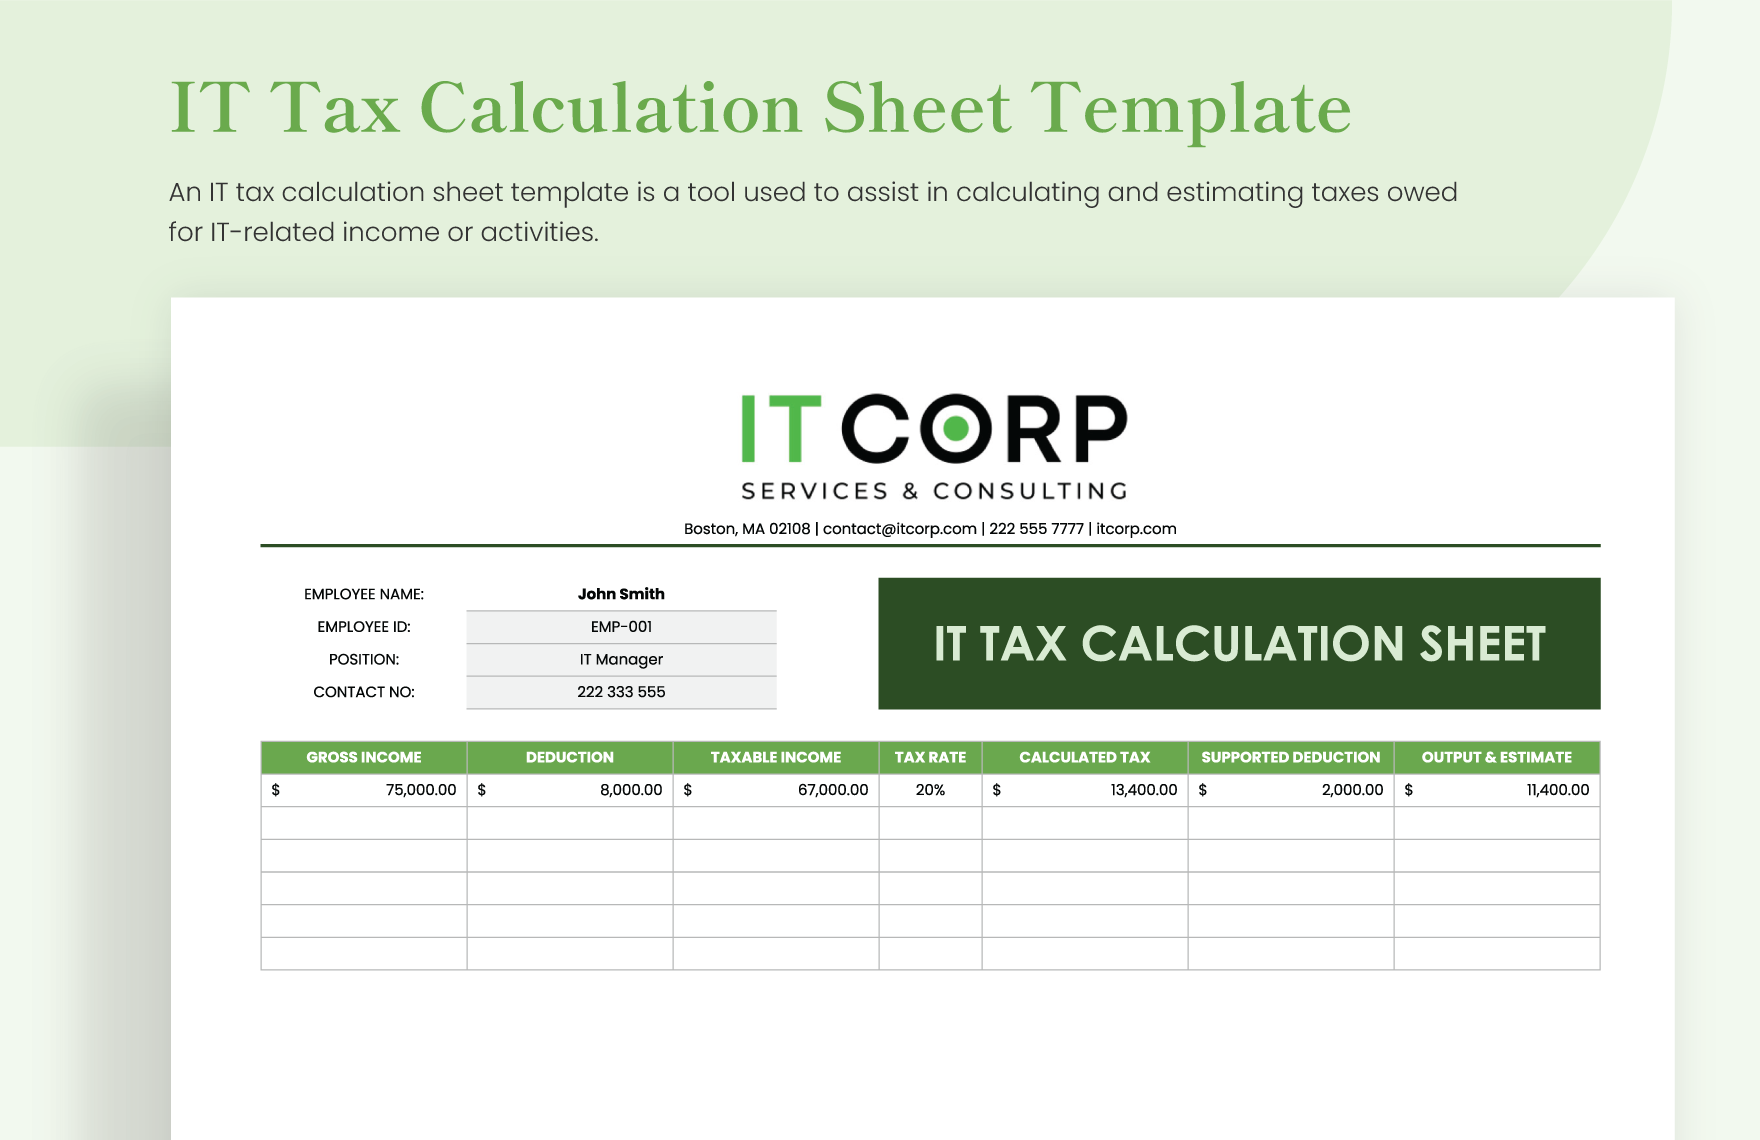 IT Tax Calculation Sheet Template in Excel, Google Sheets